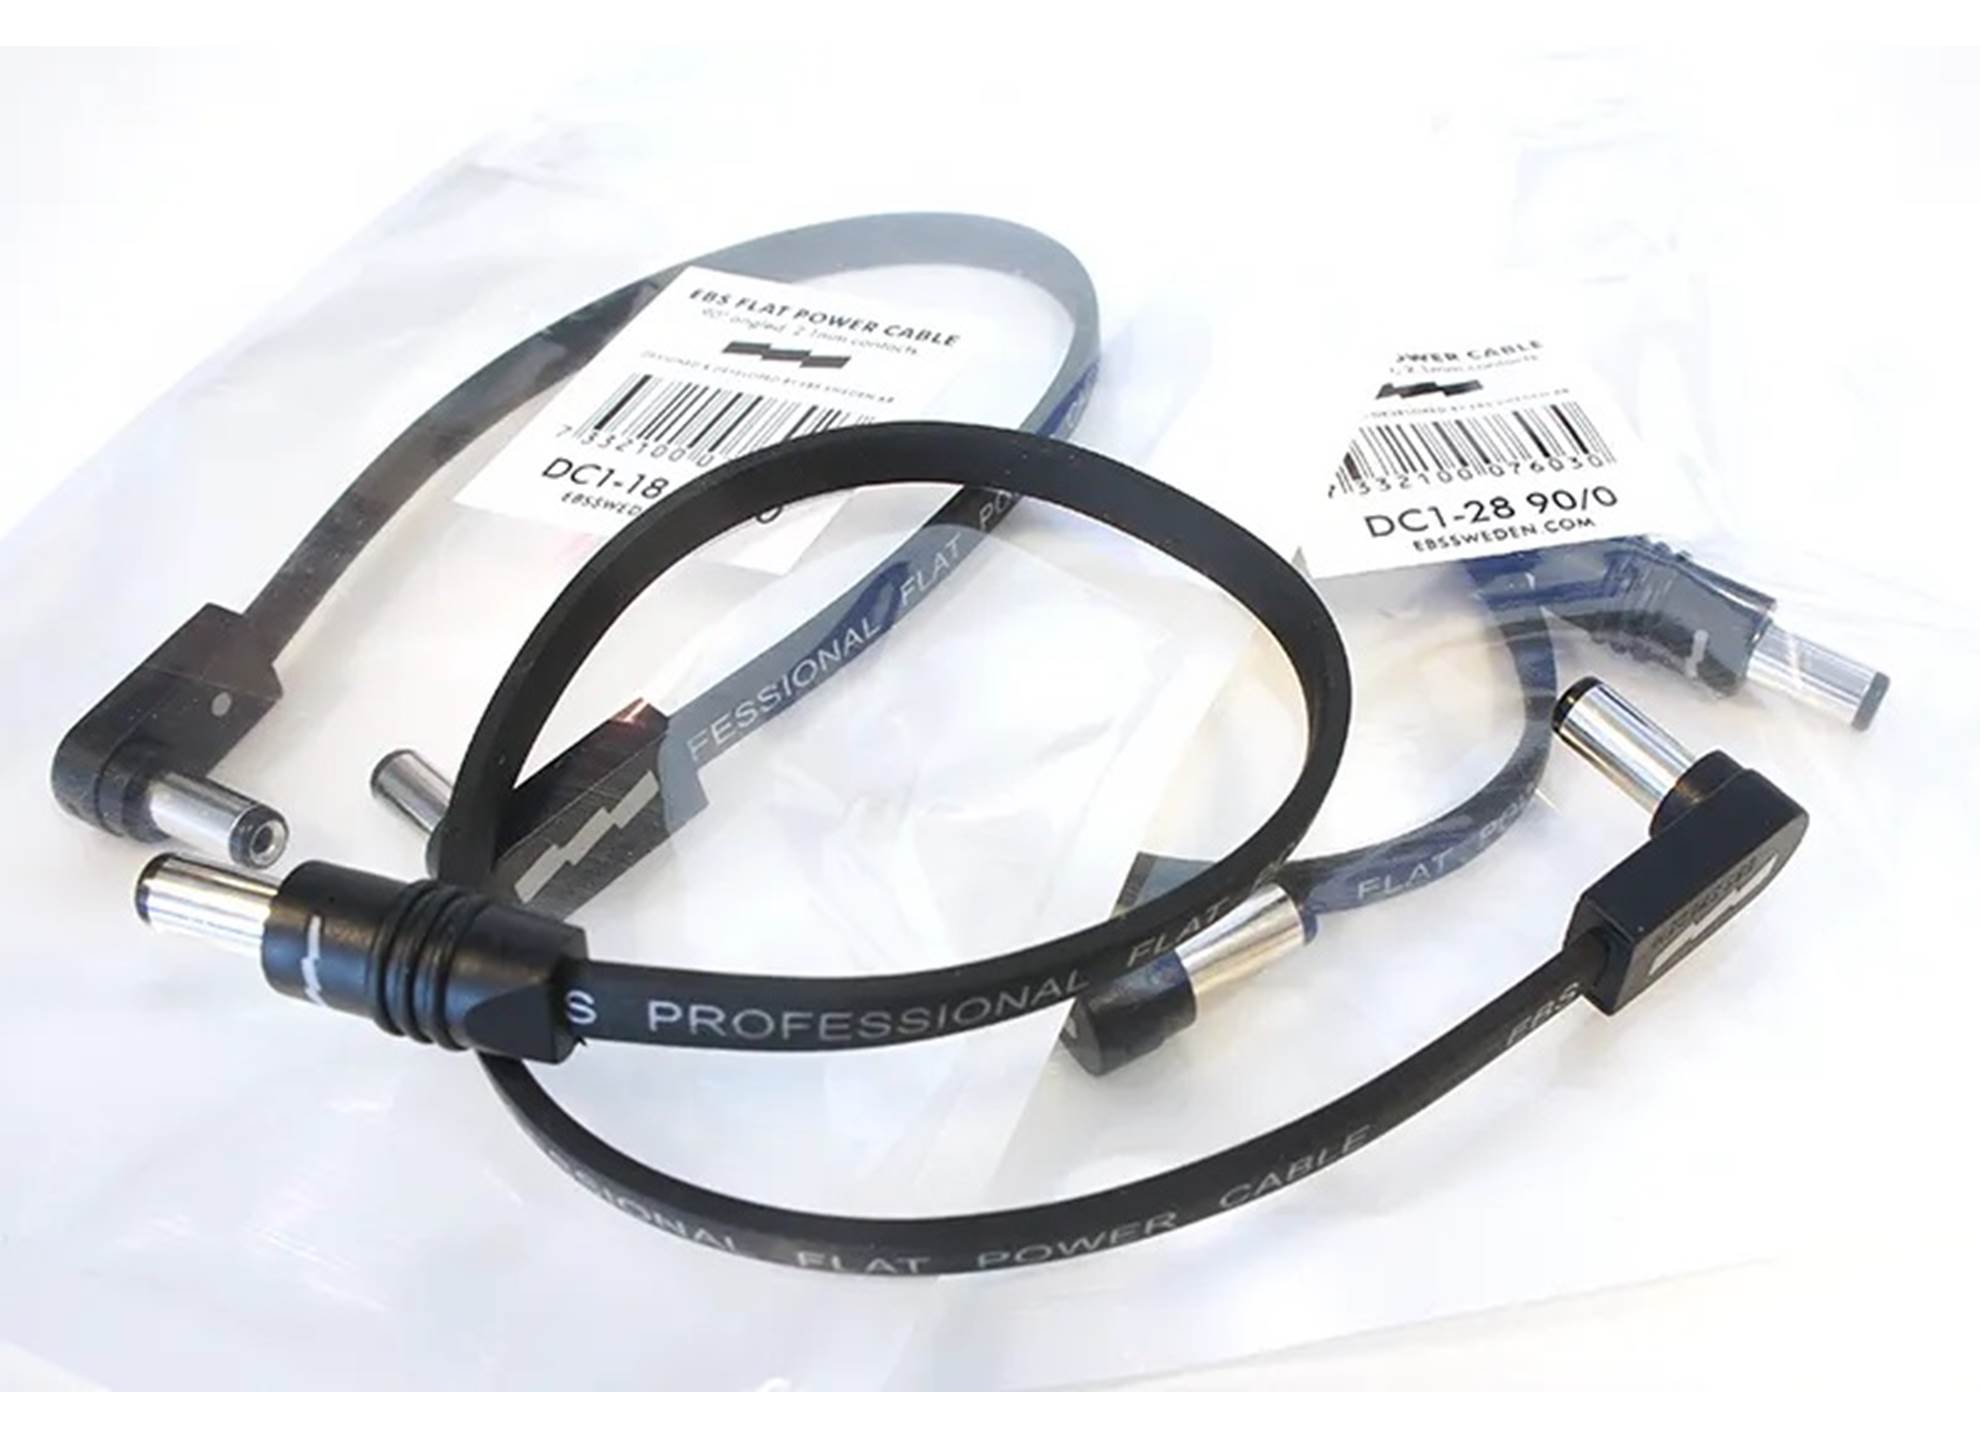 DC1-18 90/90 Flat Power Cable 18 cm